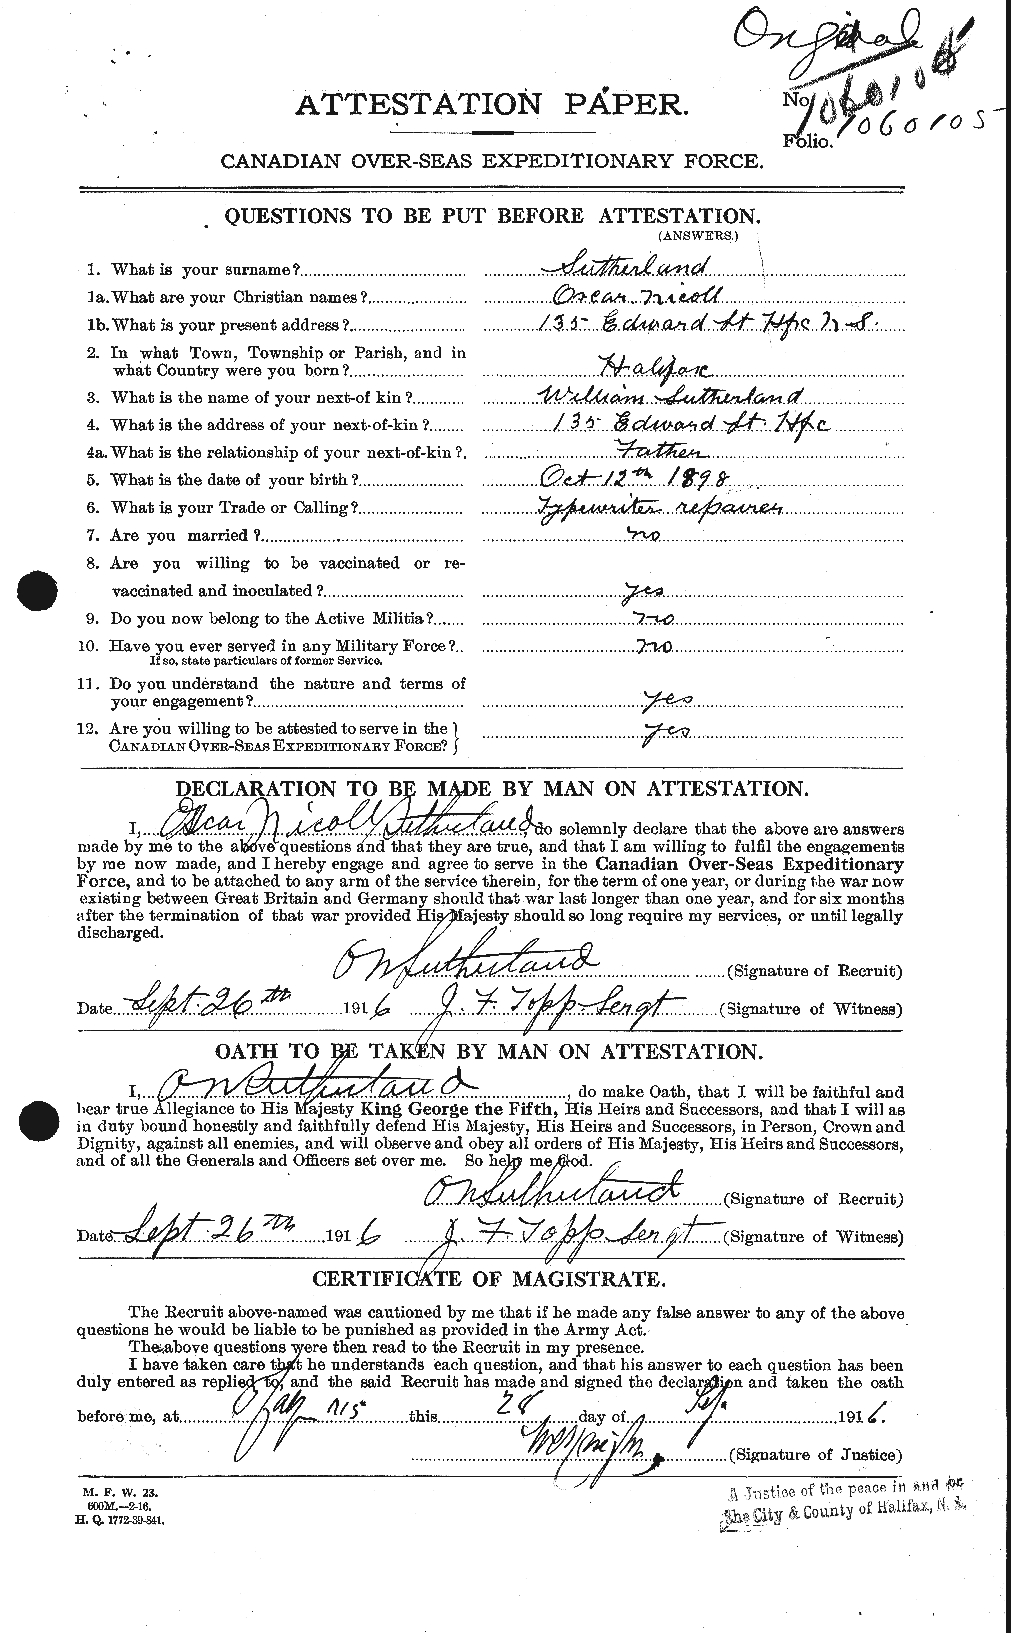 Personnel Records of the First World War - CEF 126828a